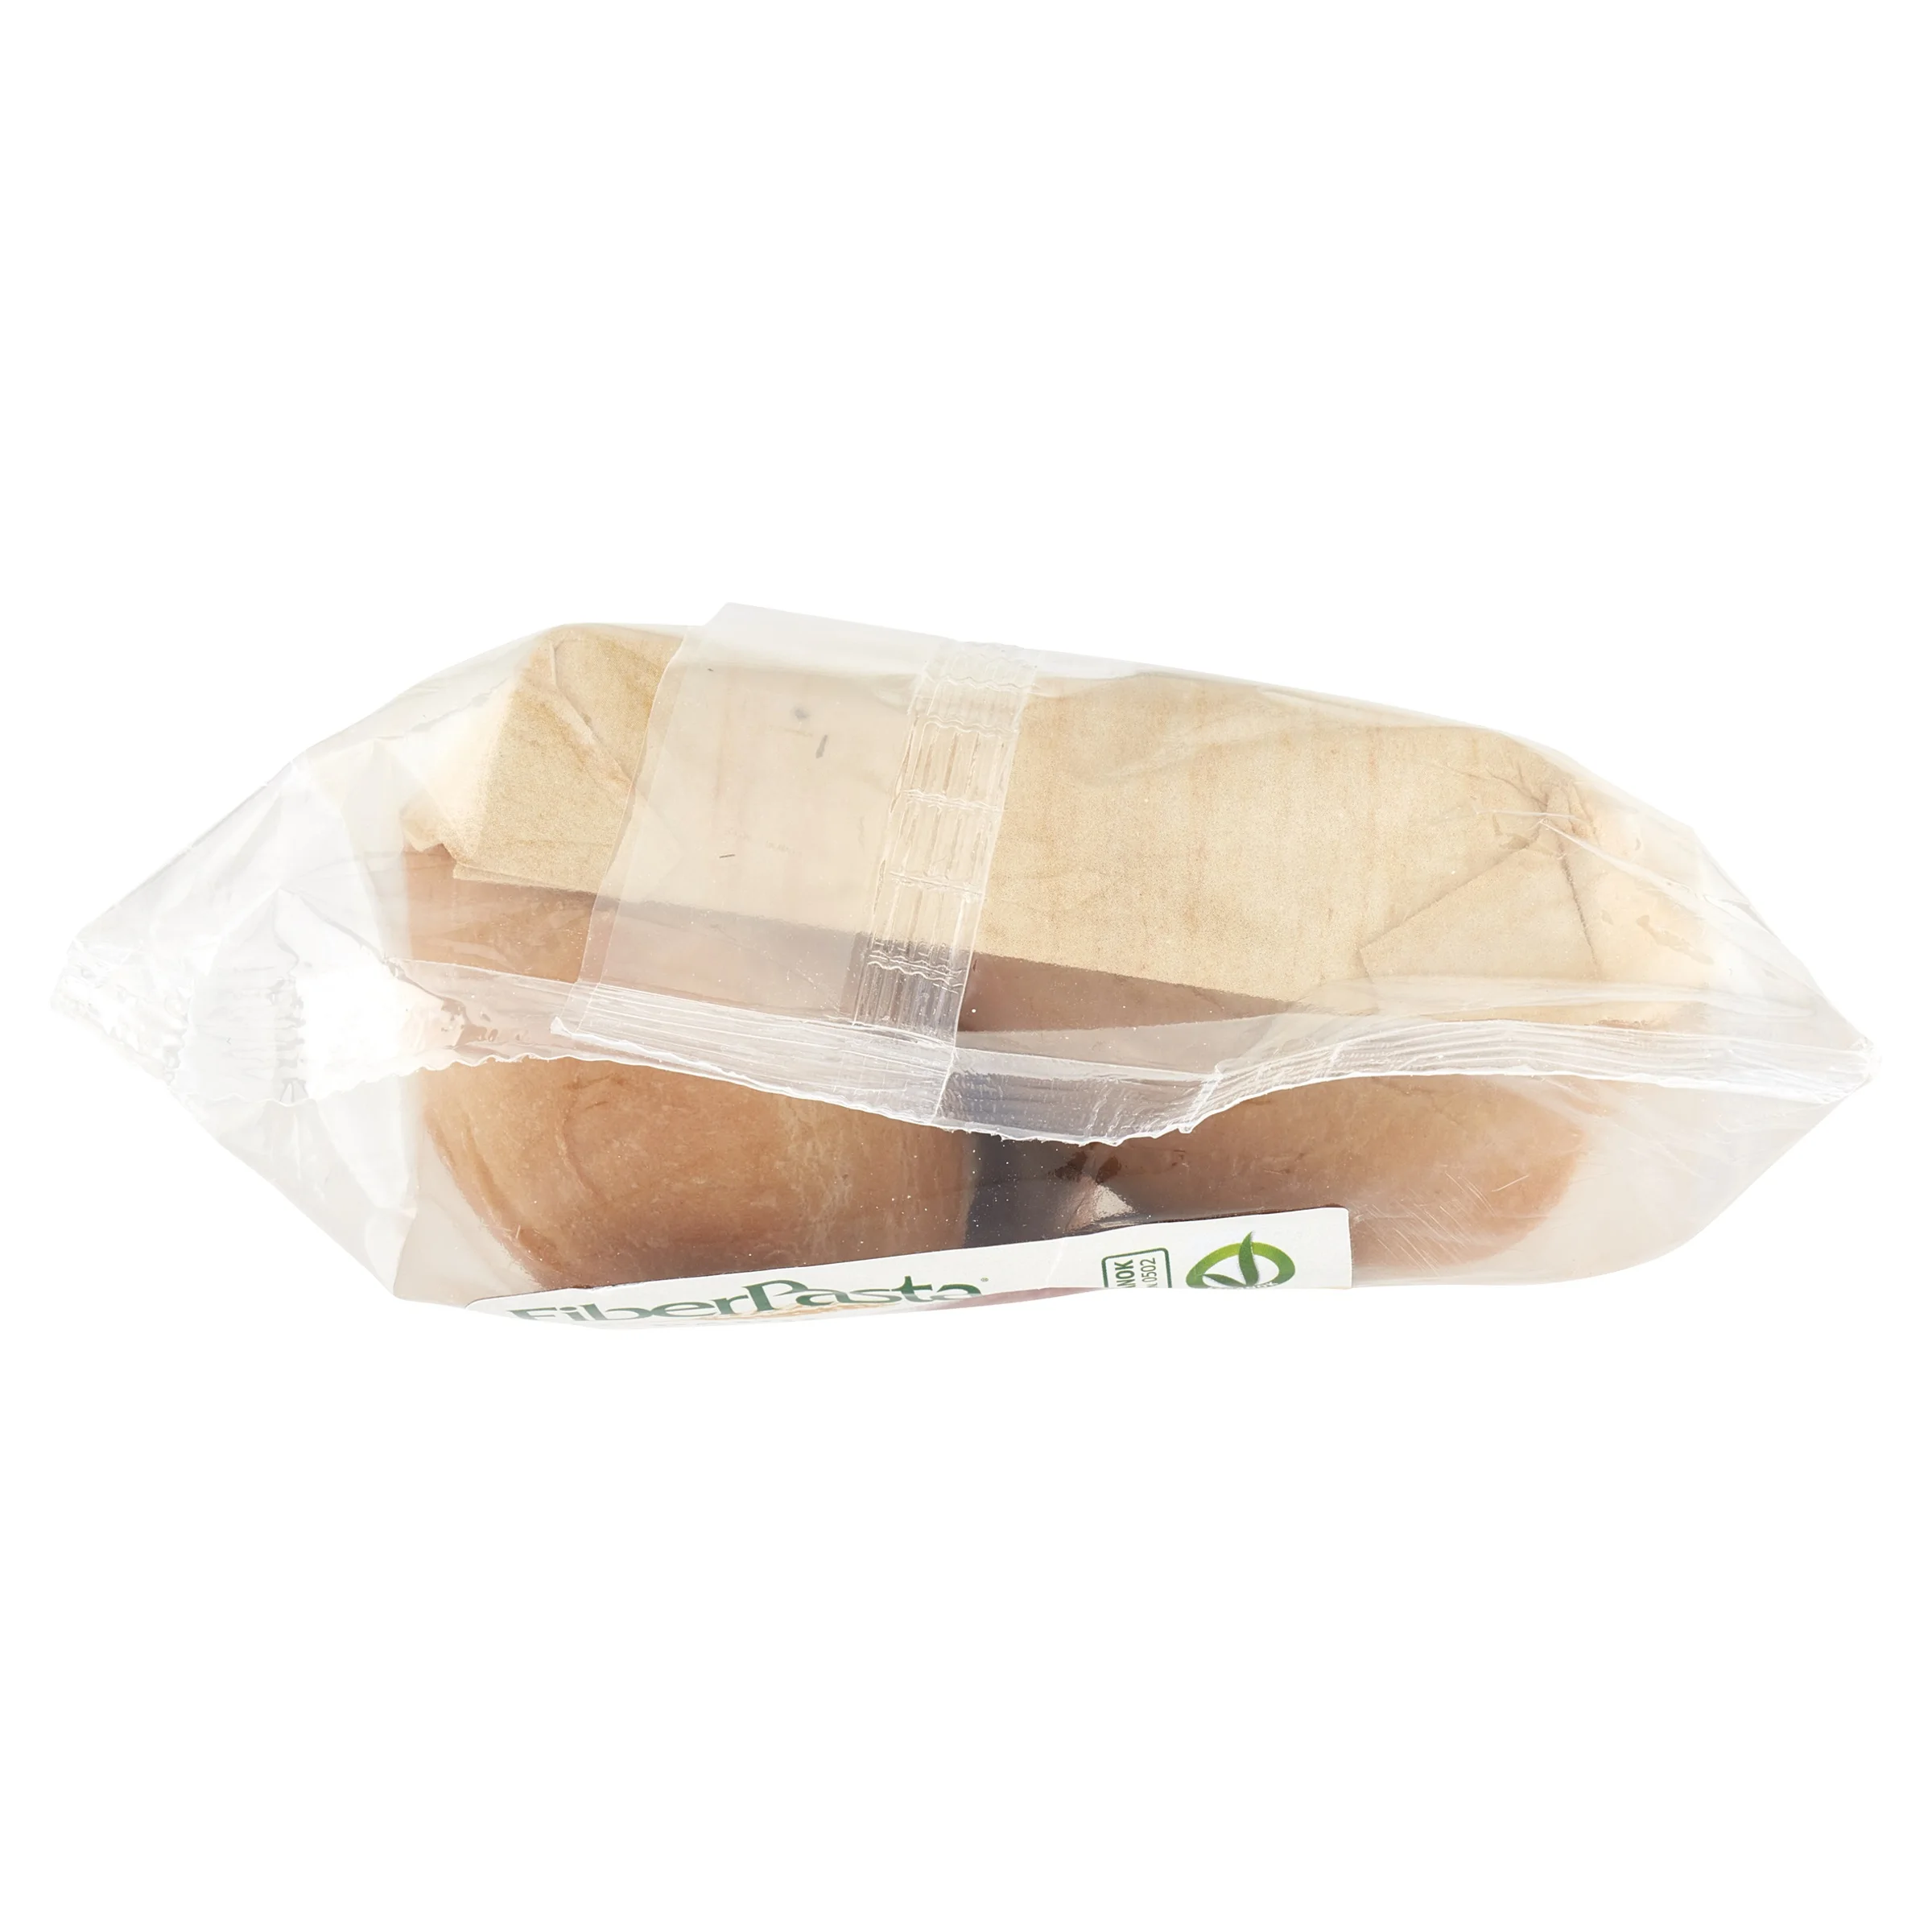 PREMIUM QUALITY ITALIAN WHEAT BREAD WITH LOW GLYCEMIC INDEX AND HIGH FIBRE, WITH EXTRA VIRGIN OLIVE OIL